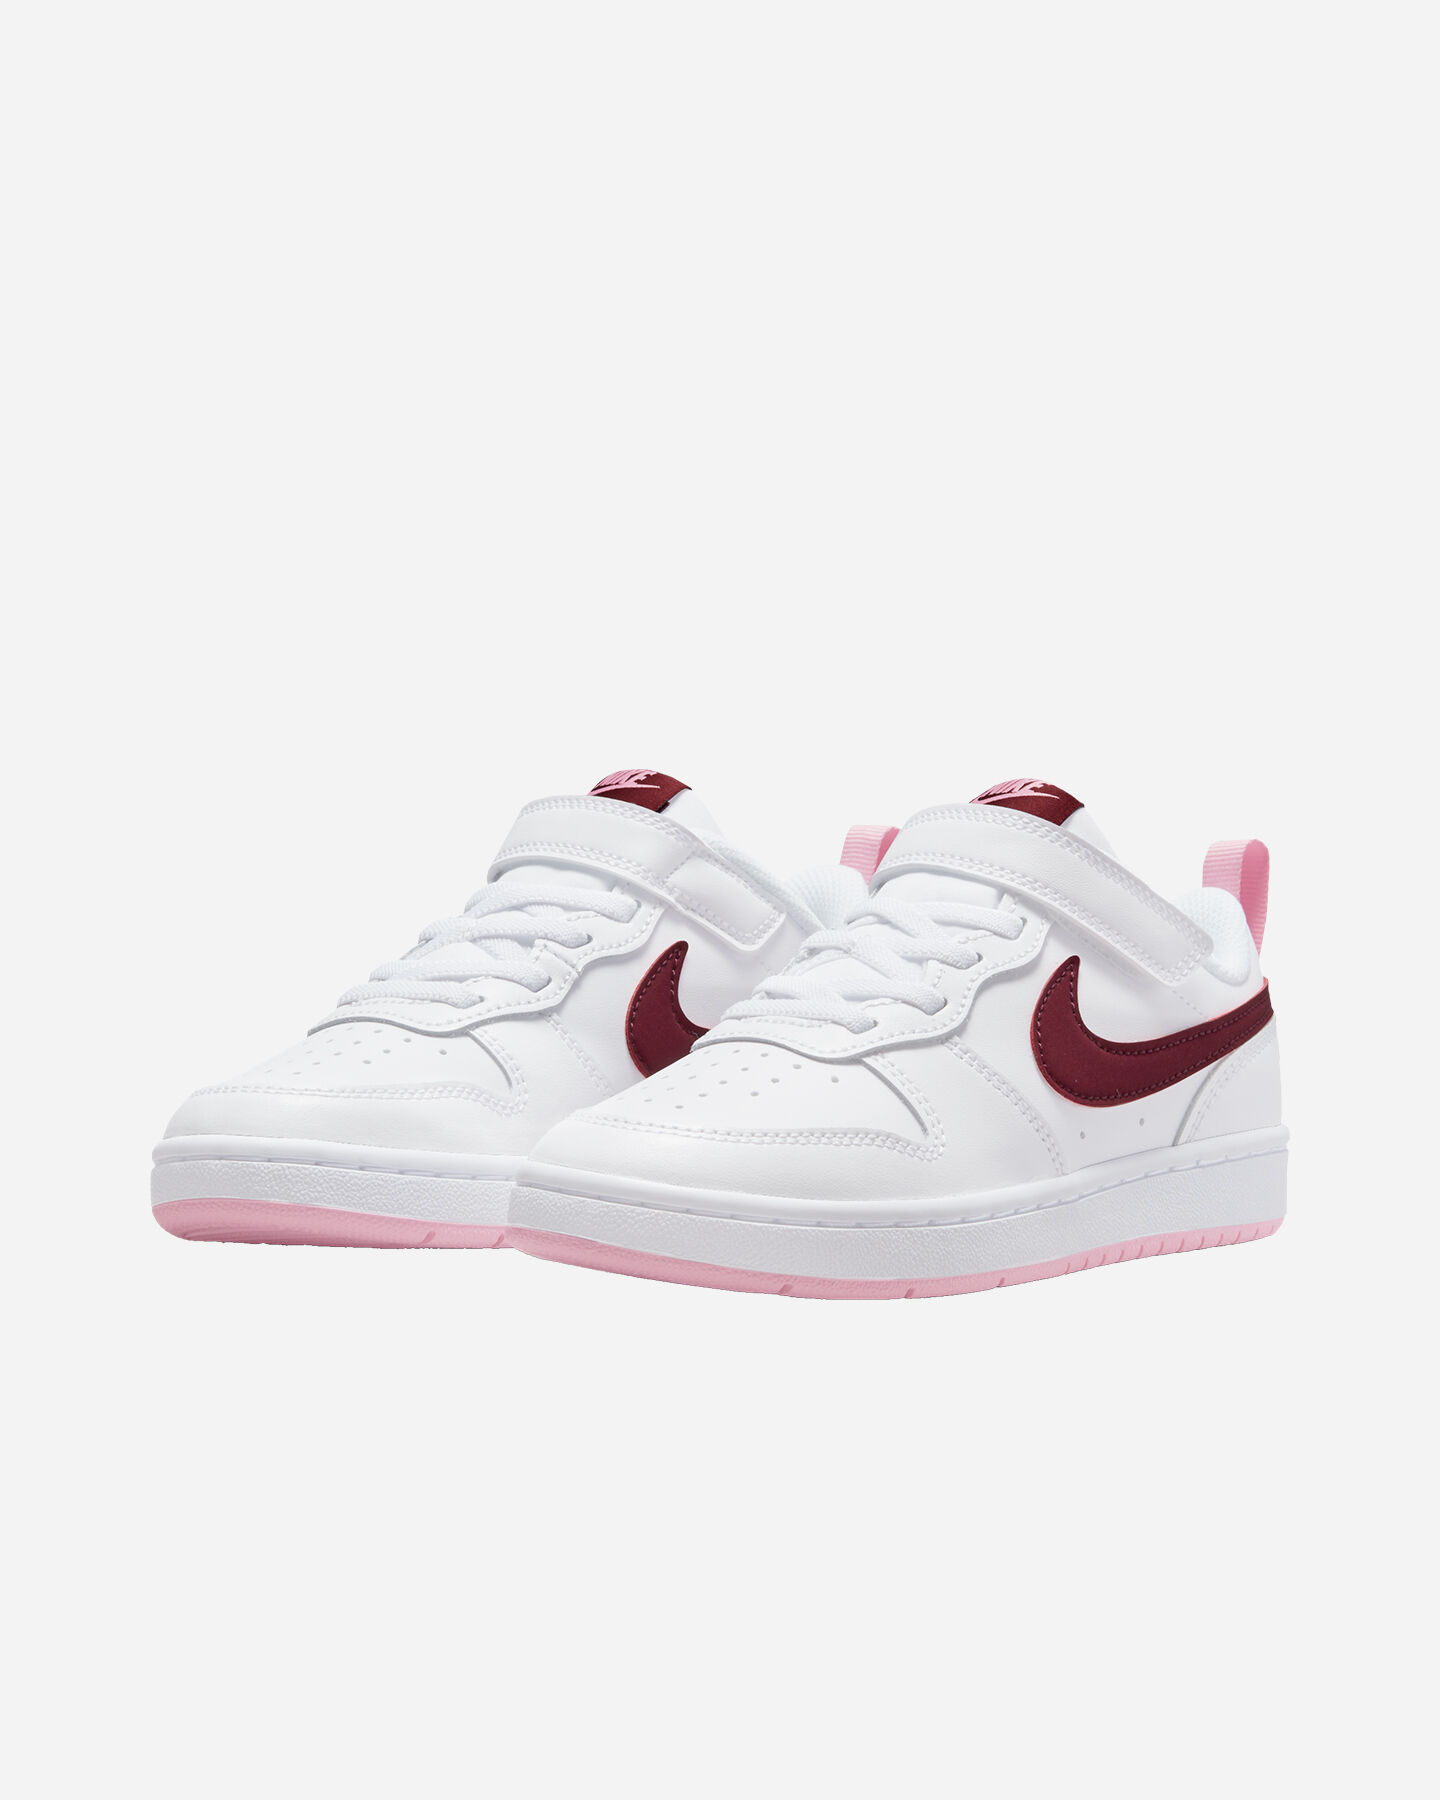  Scarpe sneakers NIKE COURT BOROUGH LOW 2 PS JR S5339378|120|1Y scatto 1